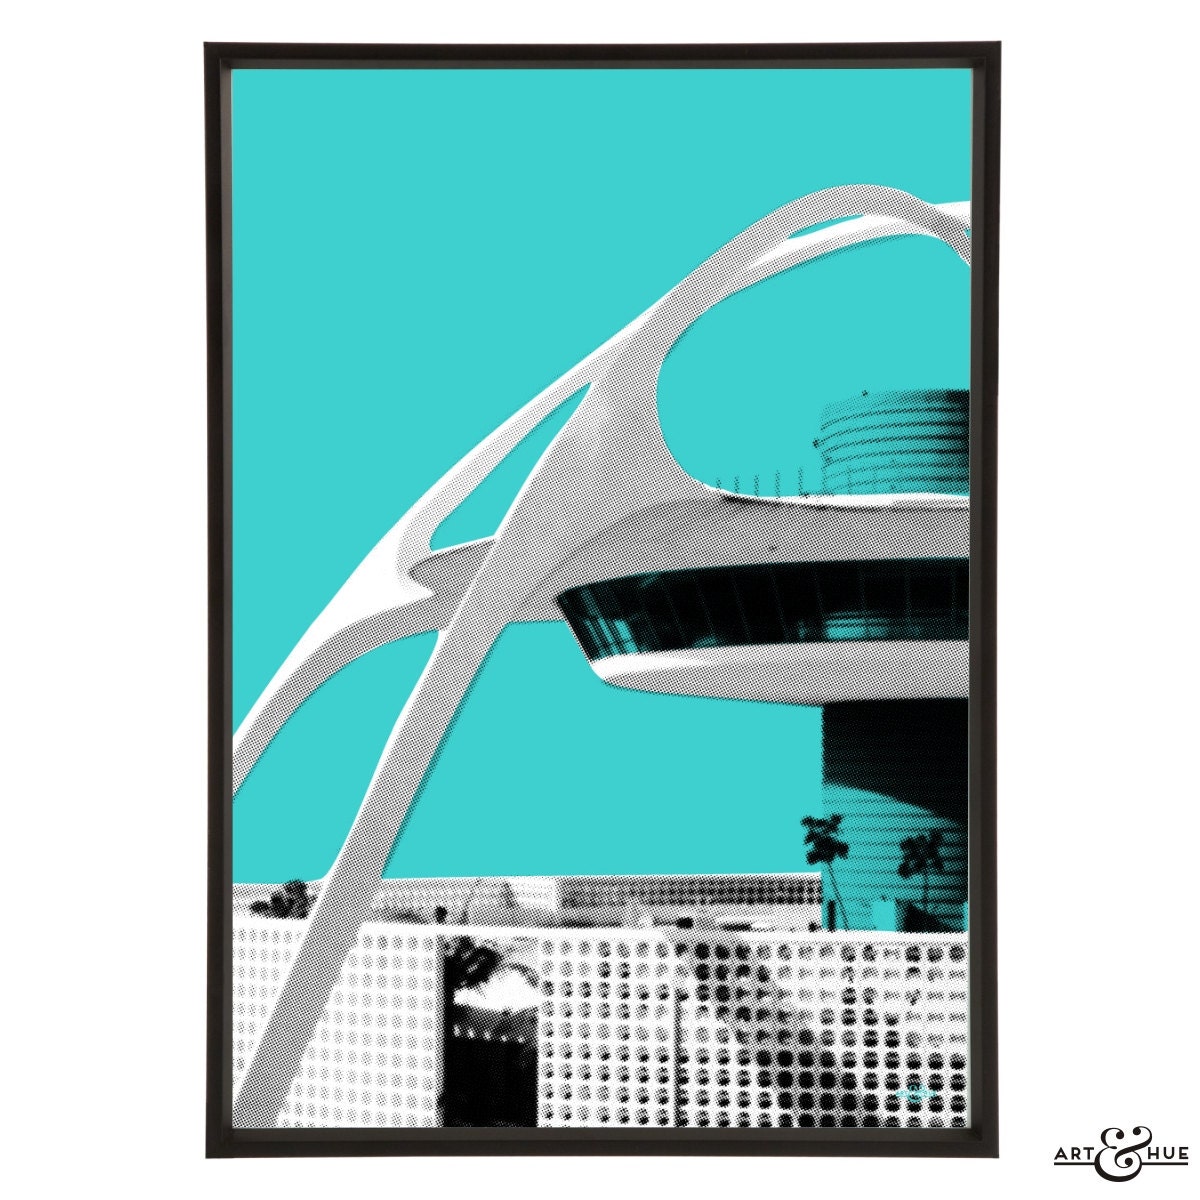 Theme Building at LAX Airport in Los Angeles Graphic Pop Art Print Retro  Jet Set Air Travel Architecture - Etsy